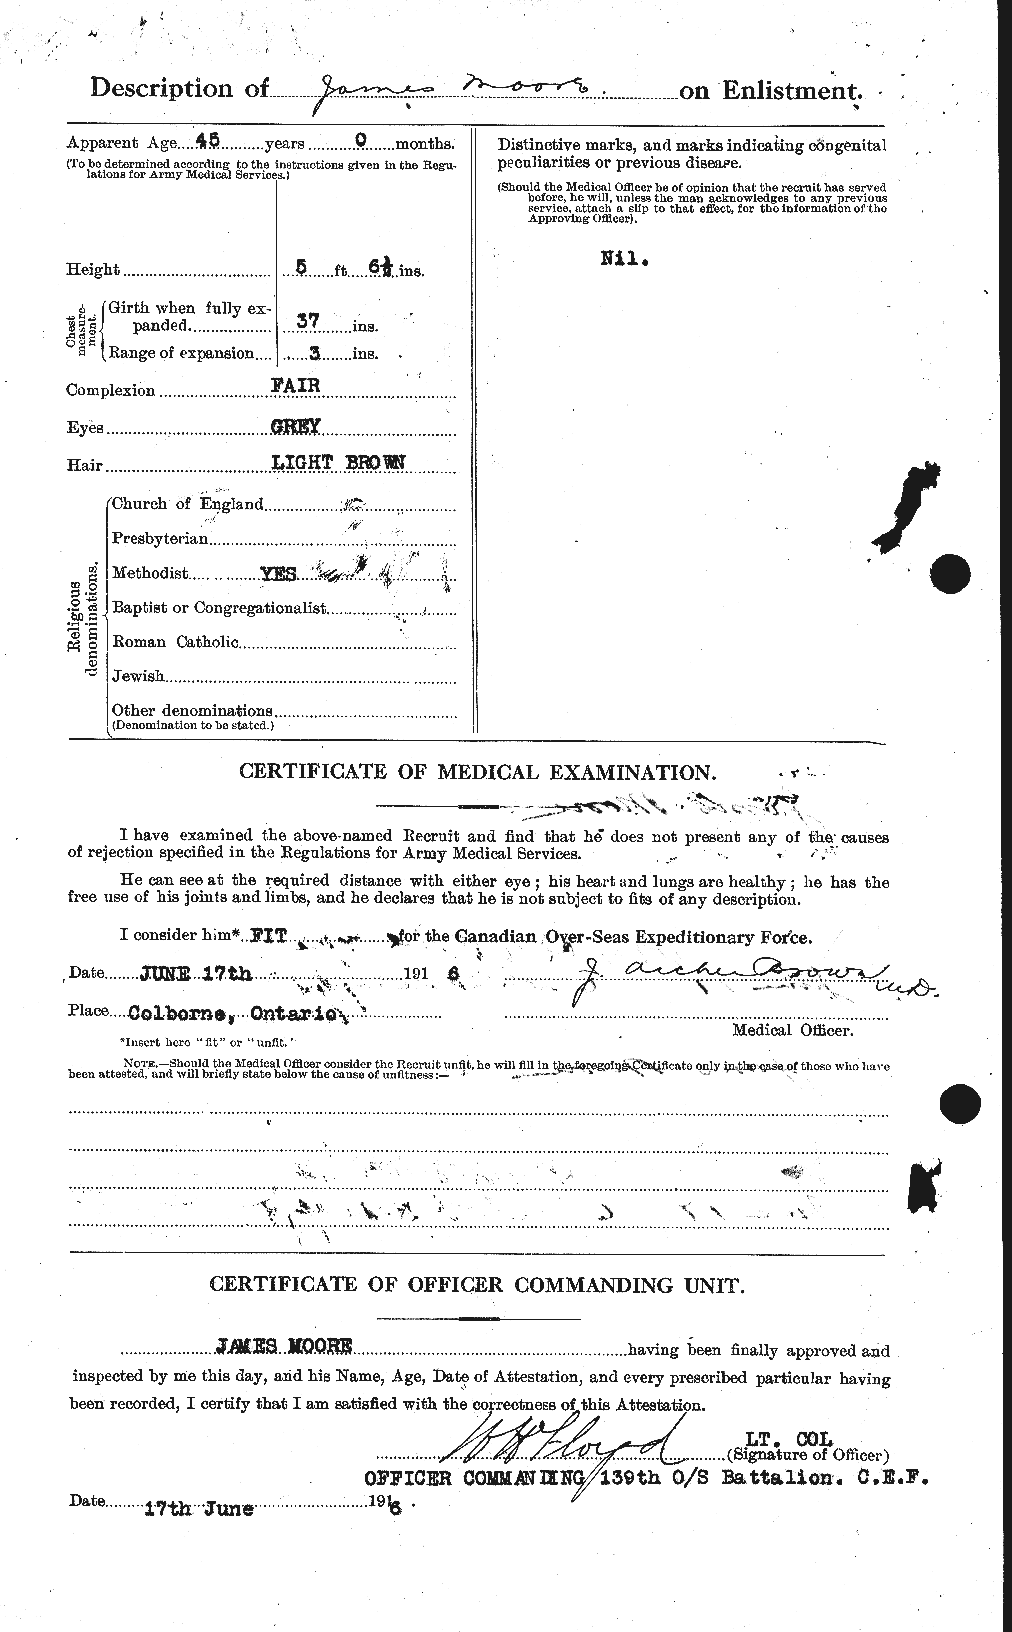 Personnel Records of the First World War - CEF 502192b